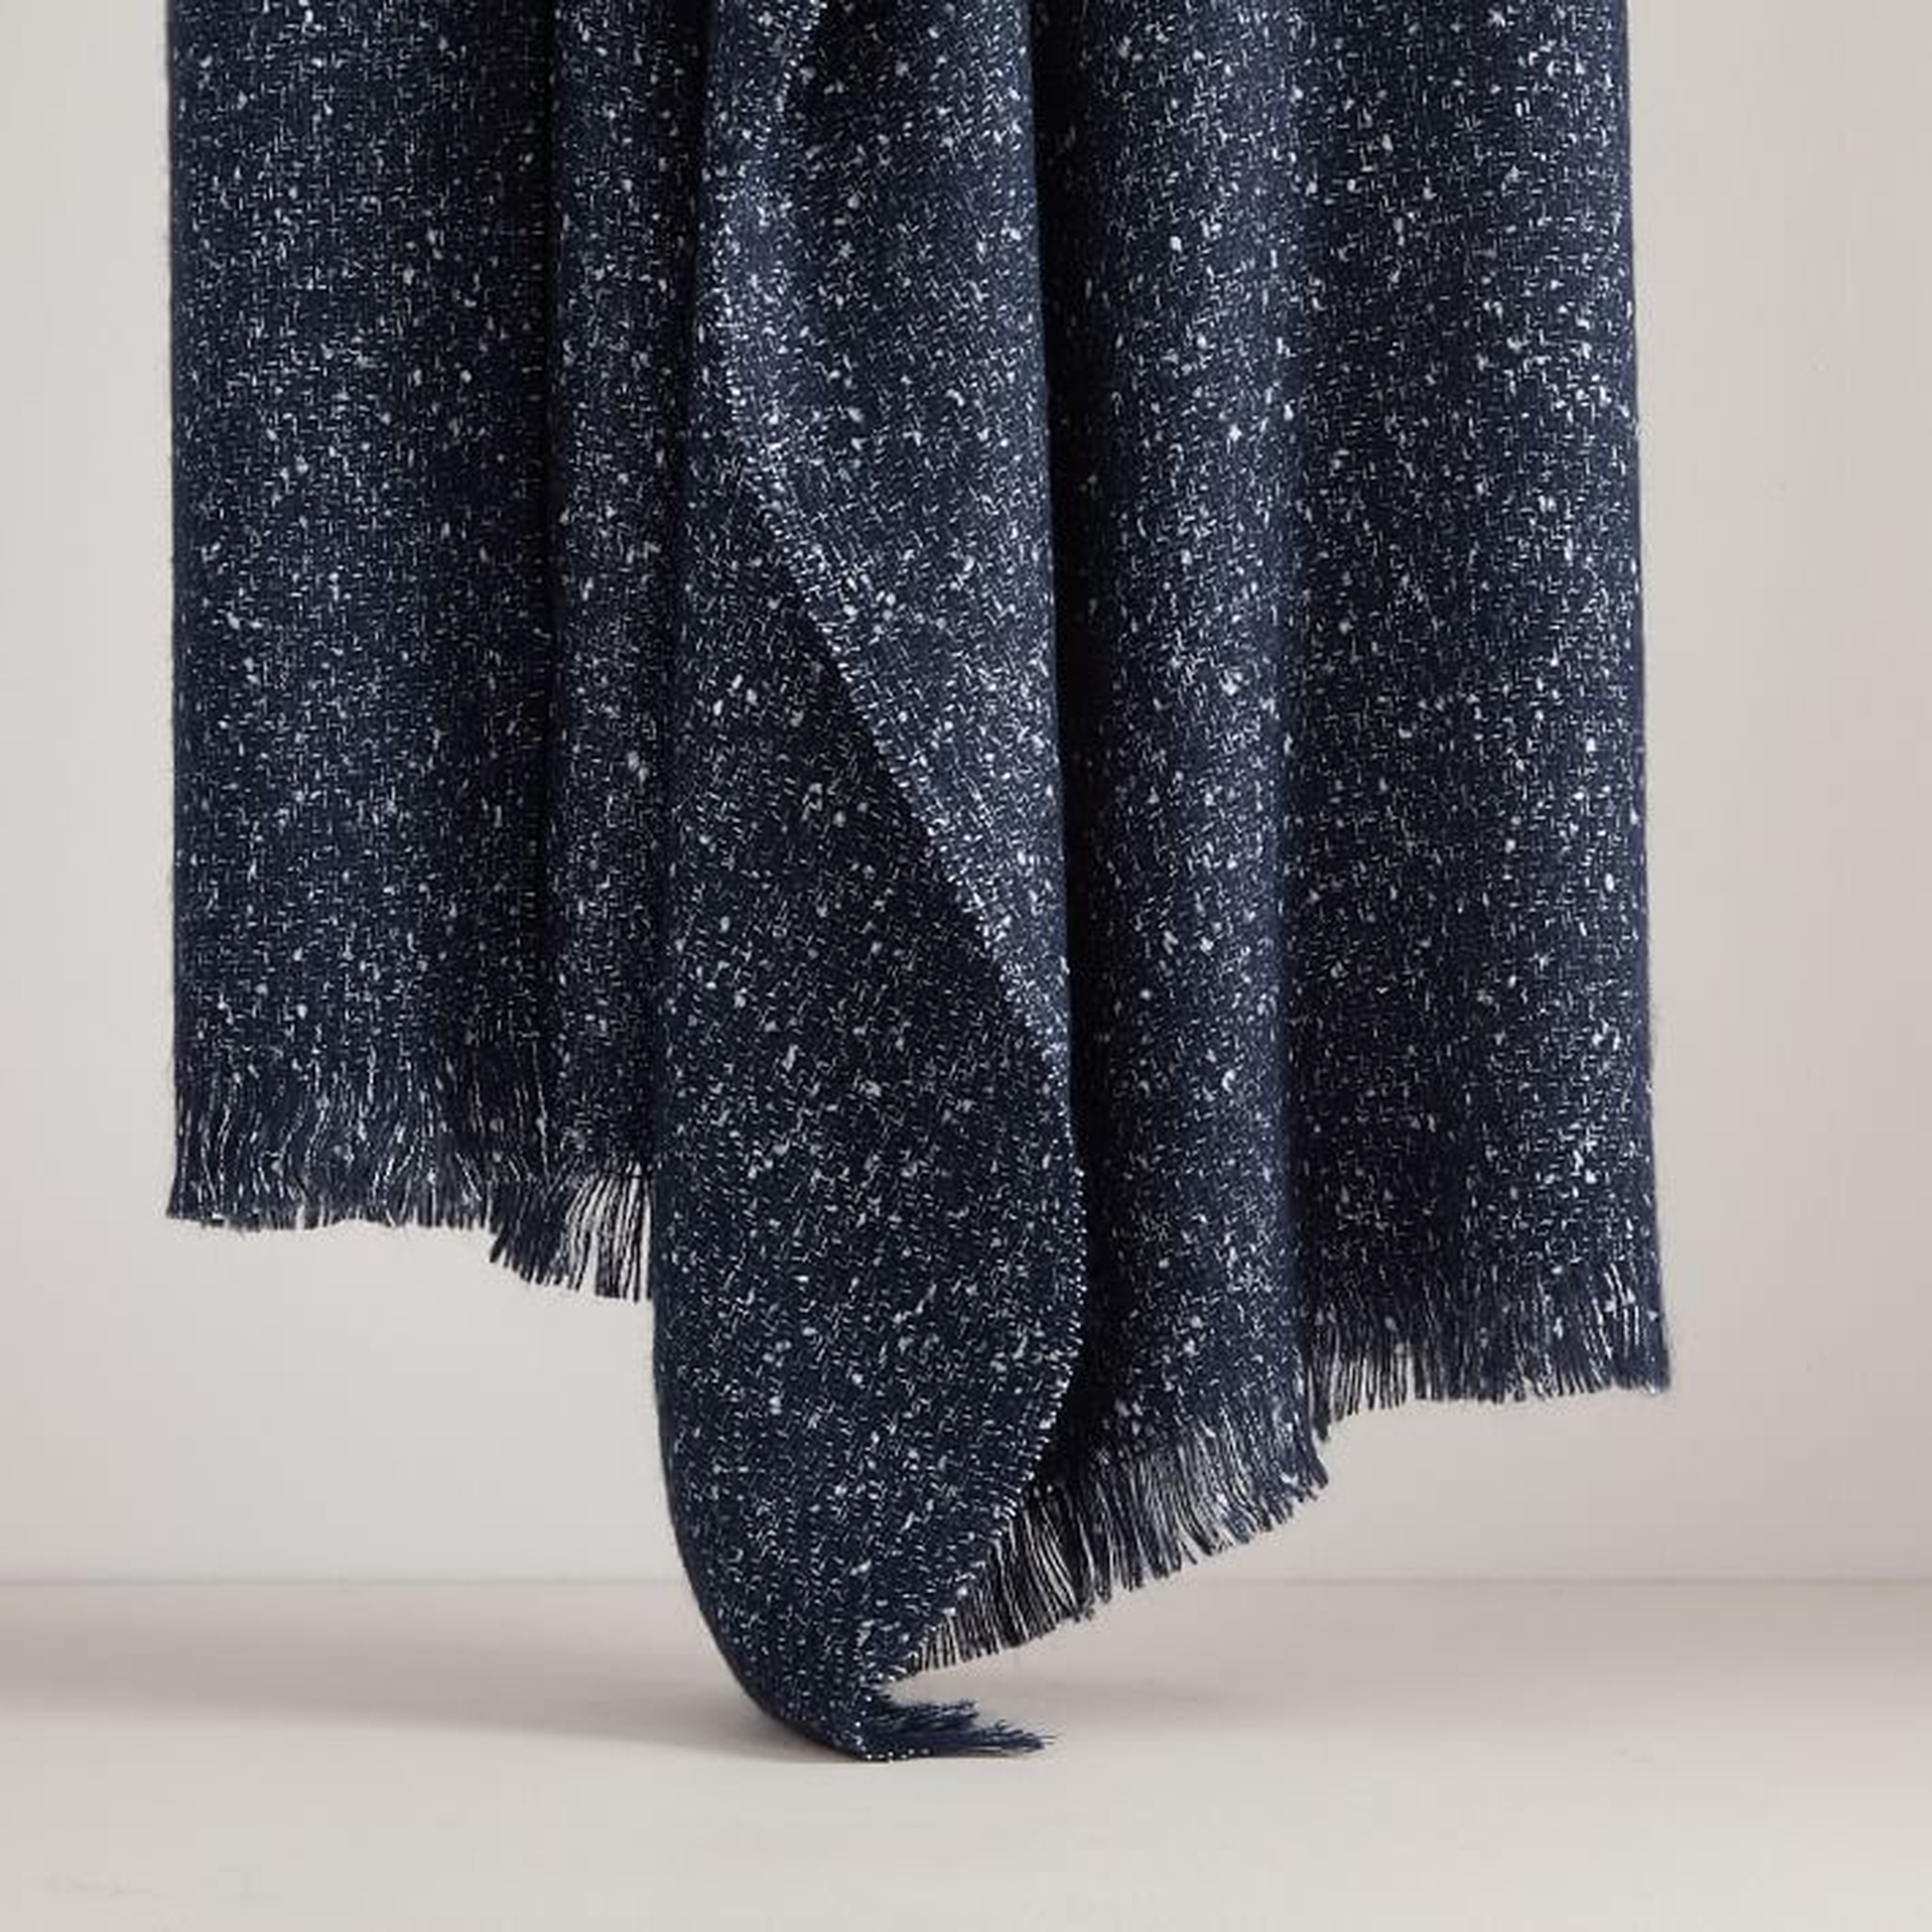 Speckled Throws - West Elm